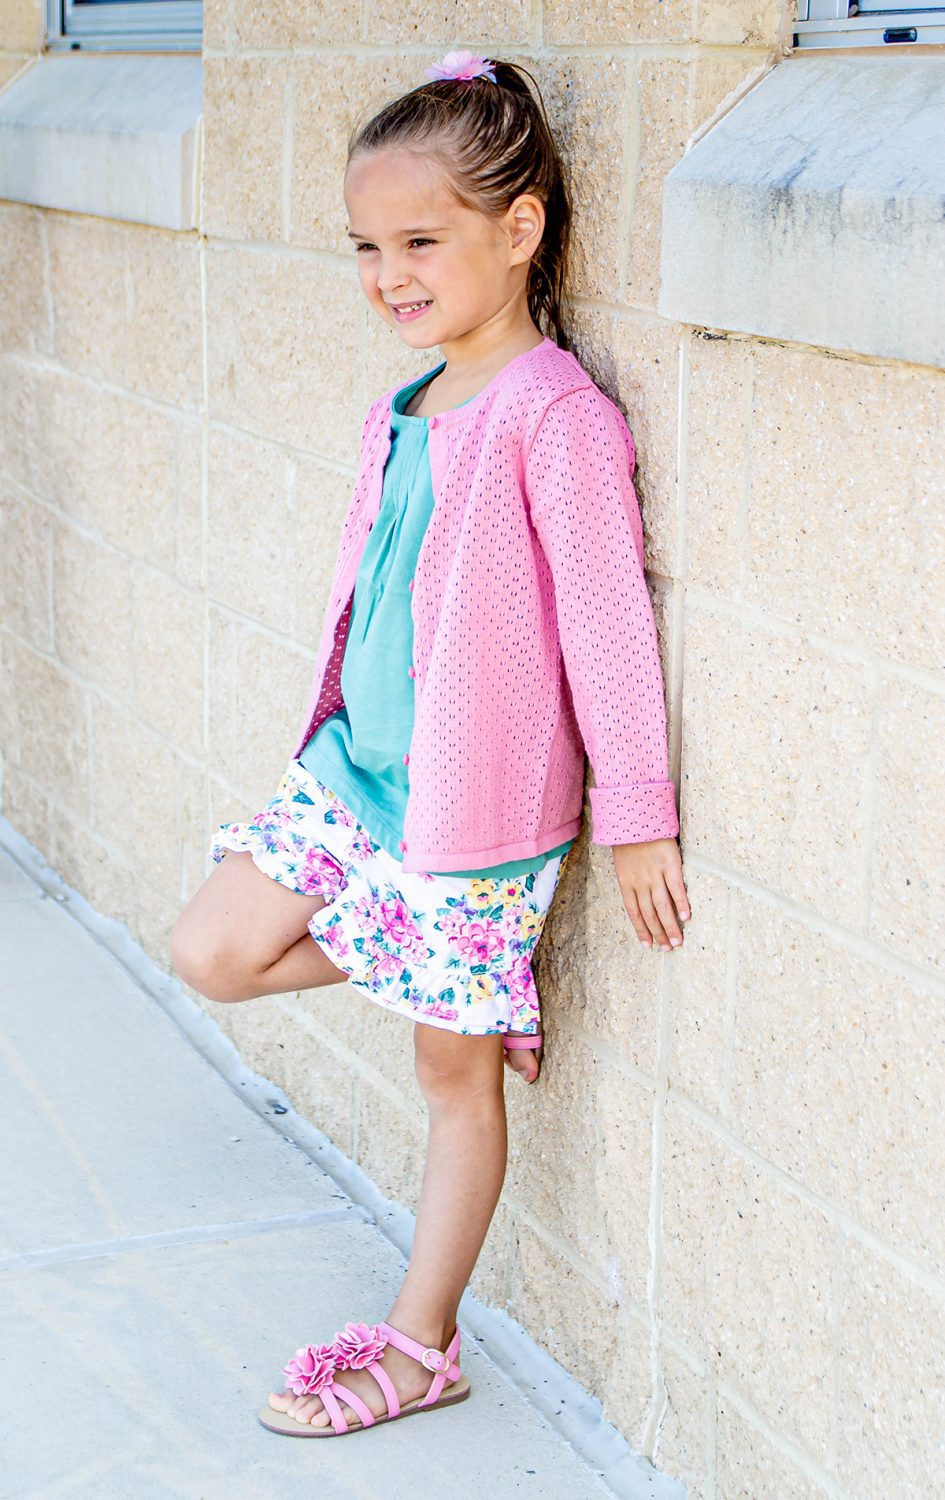 Homeschooling Or Not: 21 Back To School Outfits For All The Kids » Read ...